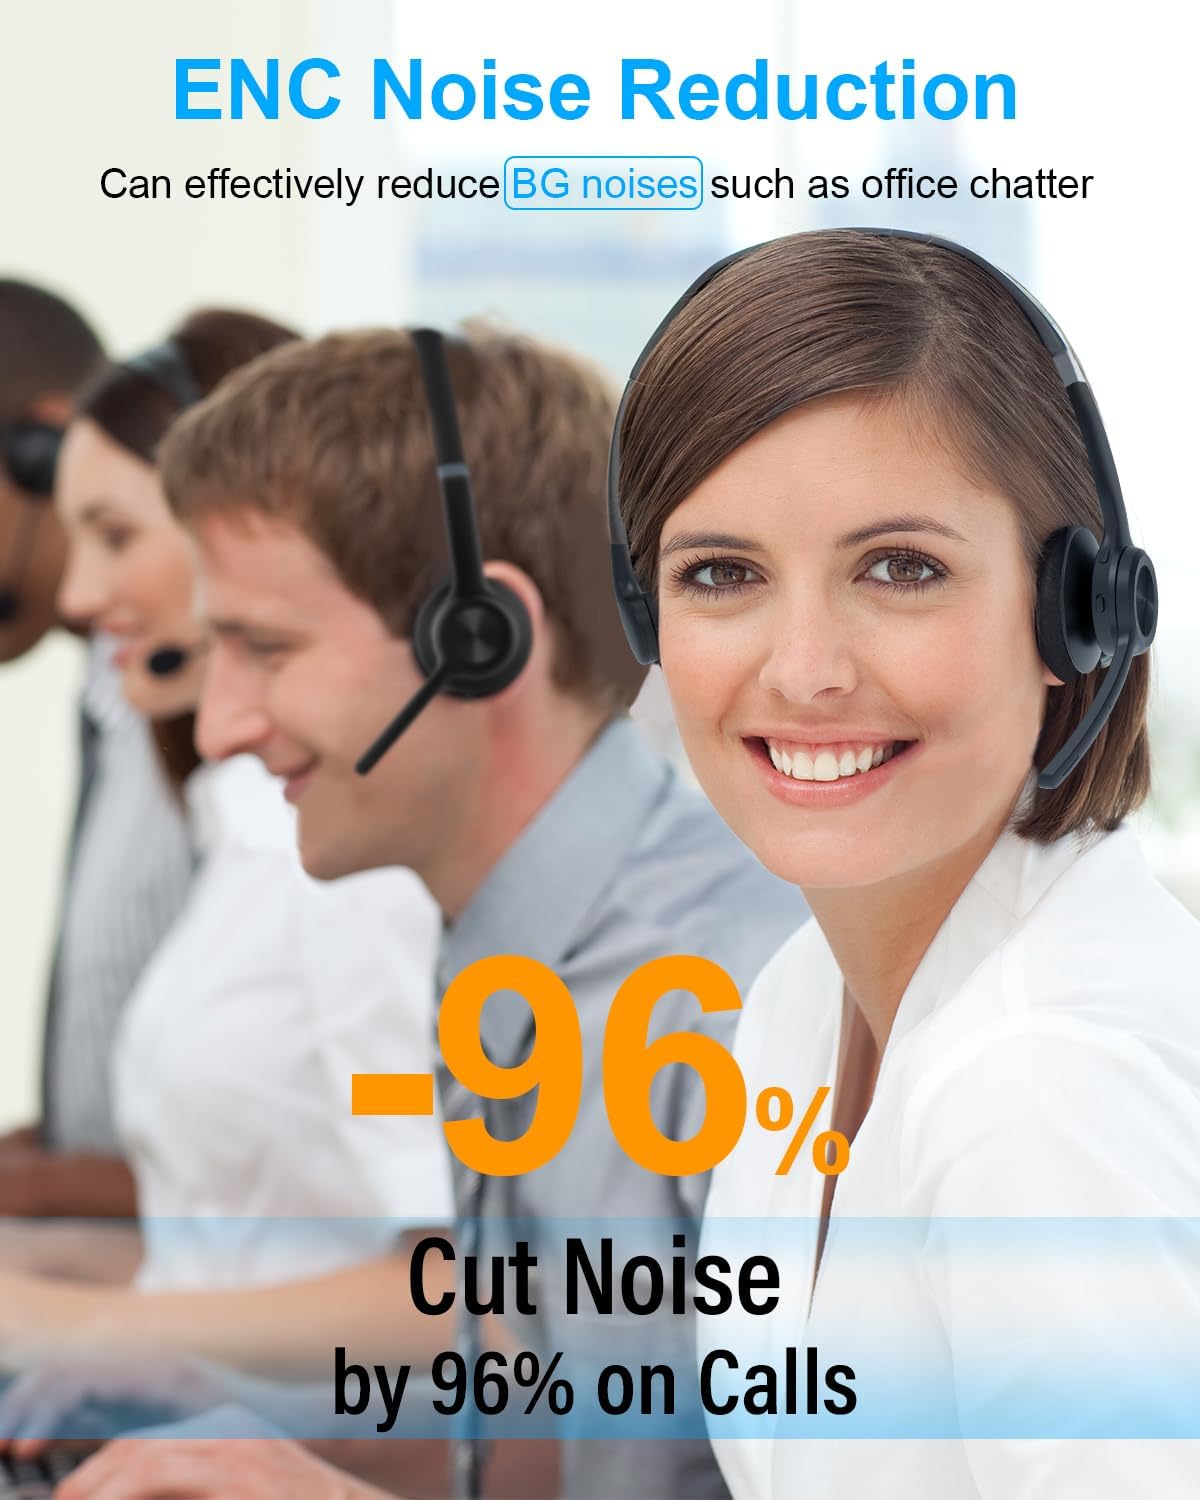 【𝟐𝟎𝟐4 𝐔𝐩𝐠𝐫𝐚𝐝𝐞𝐝】 Trucker Bluetooth Headset, Wireless Headset with Microphone ENC Noise Cancelling & Mute Button, 30H Talk Time, Bluetooth 5.2 Headphones for Work, Office, Call Center